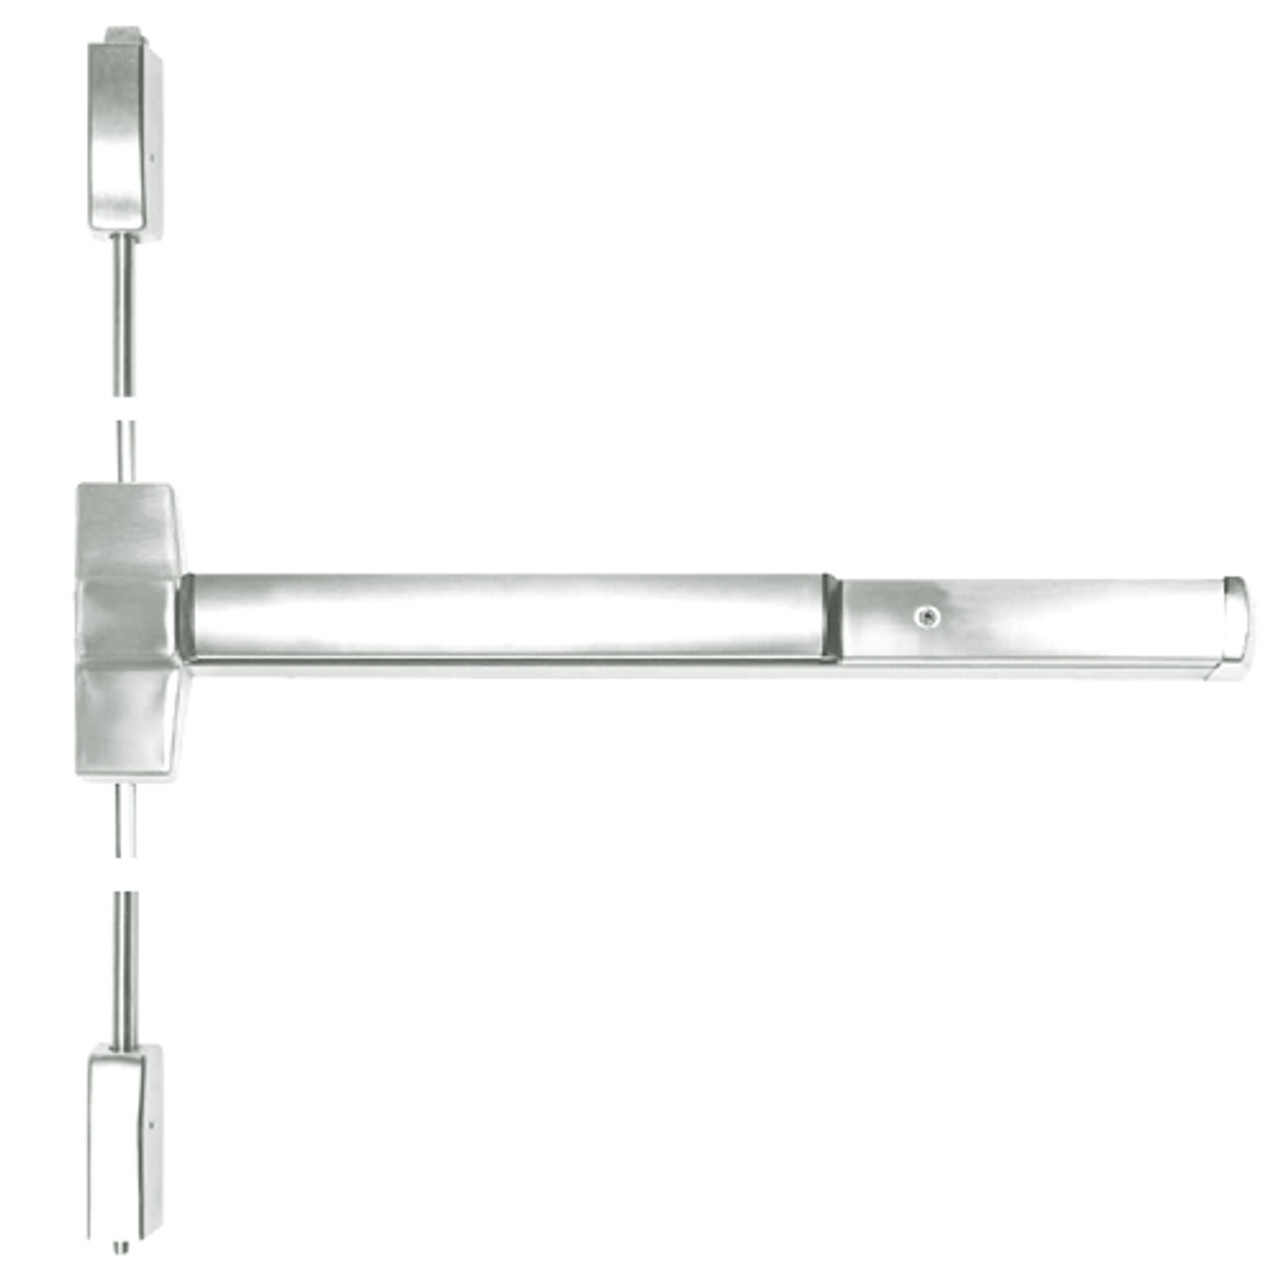 ED5400-618-W048-MELR Corbin ED5400 Series Non Fire Rated Vertical Rod Exit Device with Motor Latch Retraction in Bright Nickel Finish